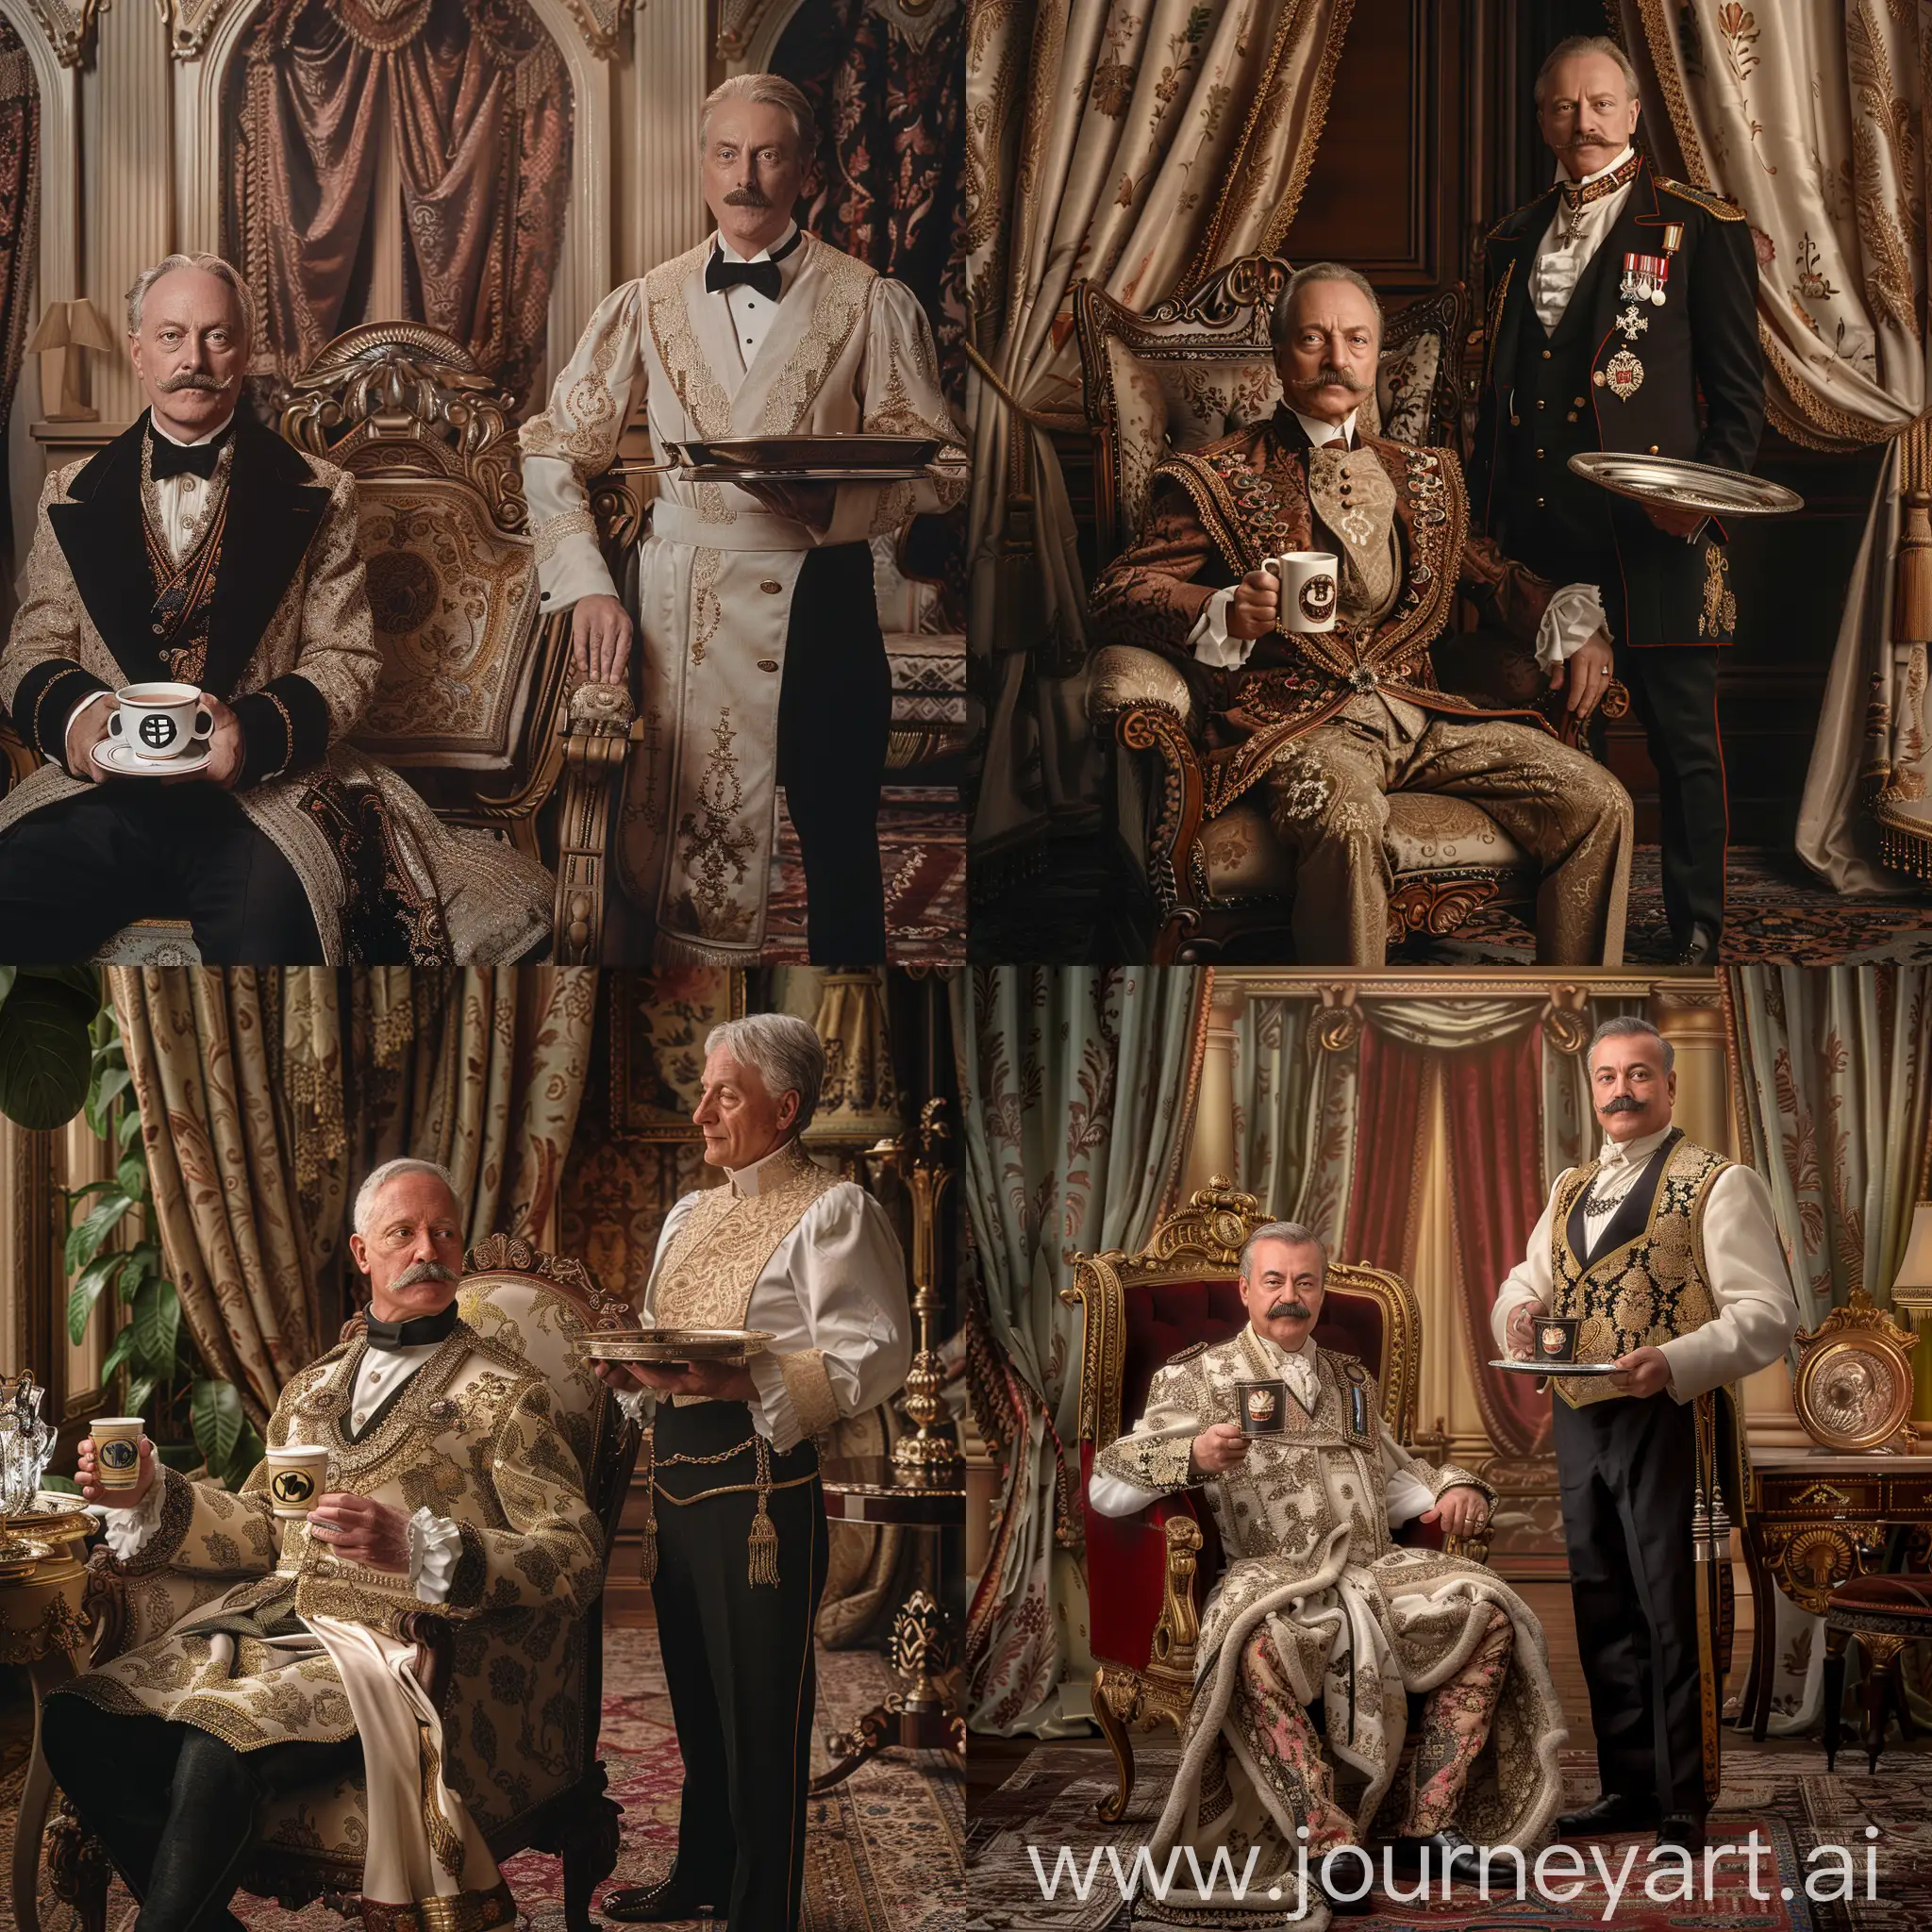 Regal-Middleaged-Man-and-Butler-in-Lavish-1900s-Setting